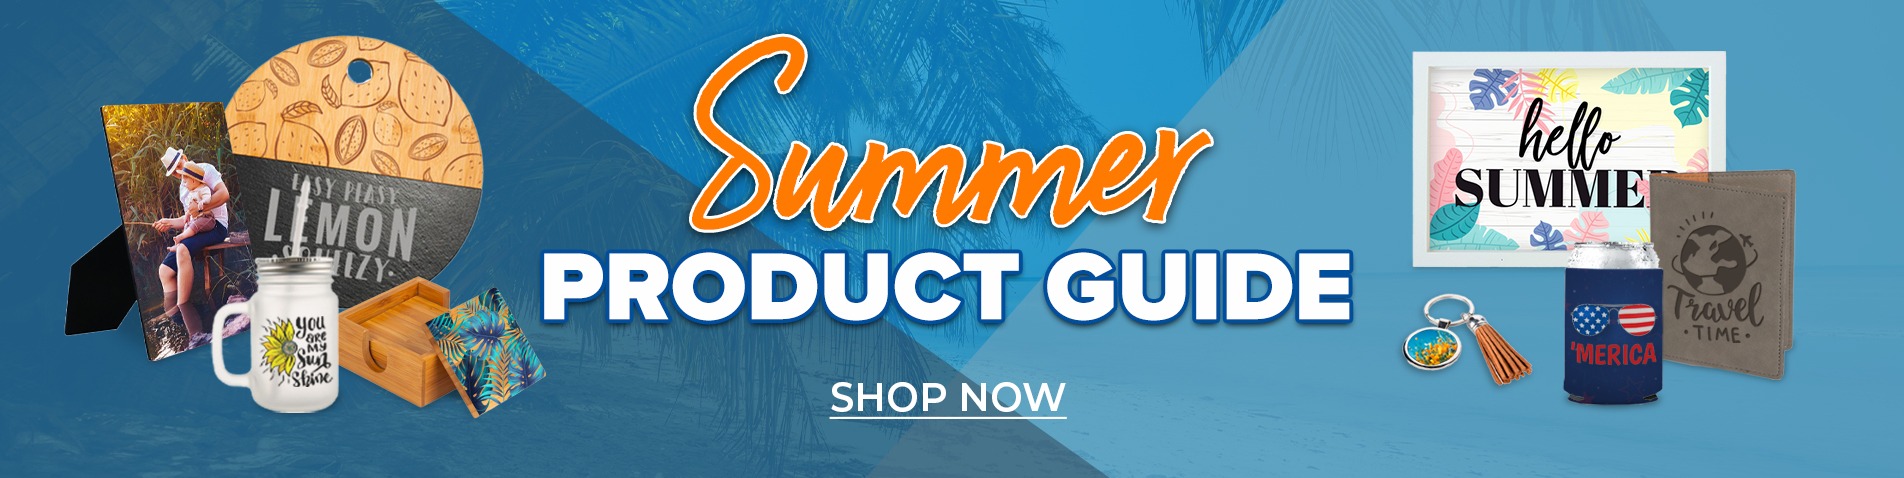 Summer Product Guide Shop Now